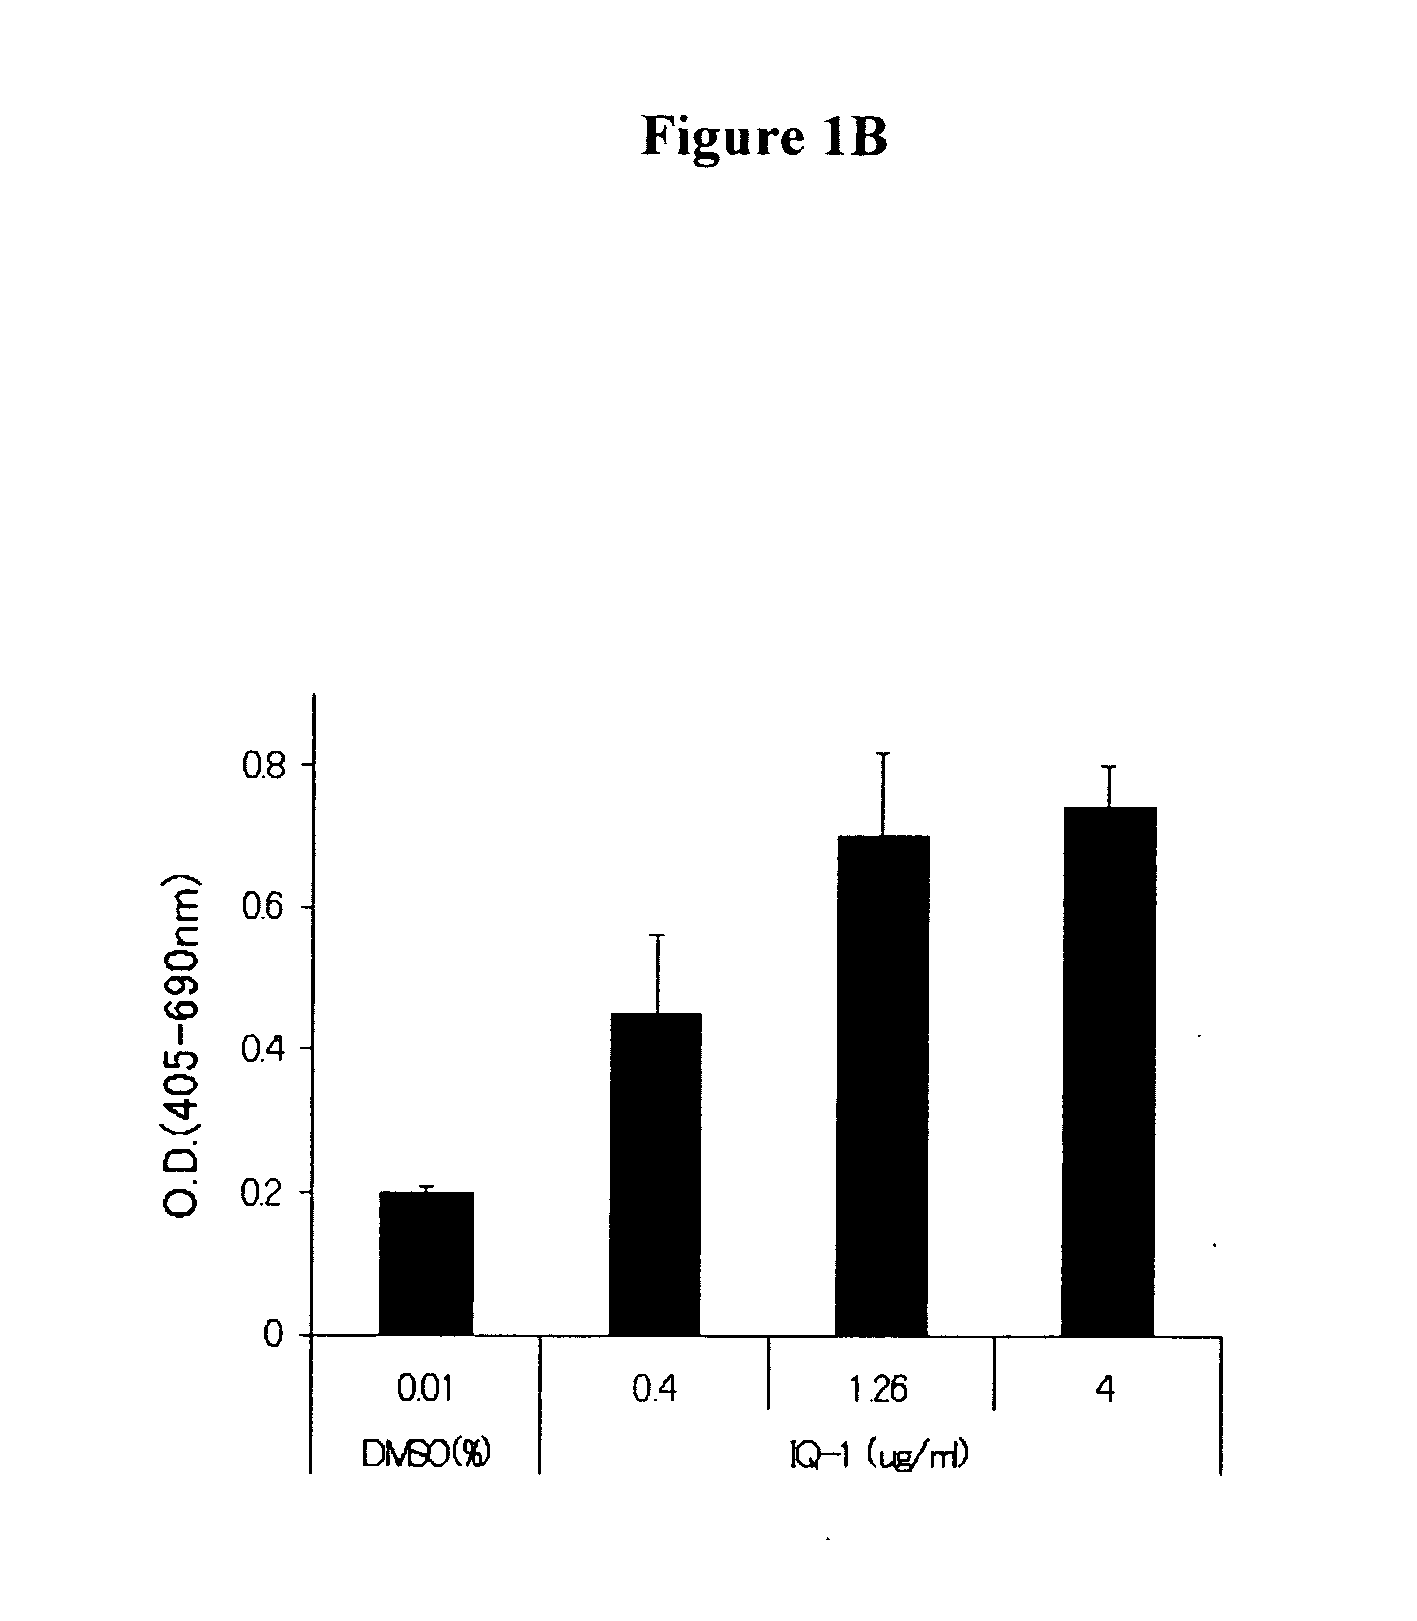 Serum-free expansion of cells in culture